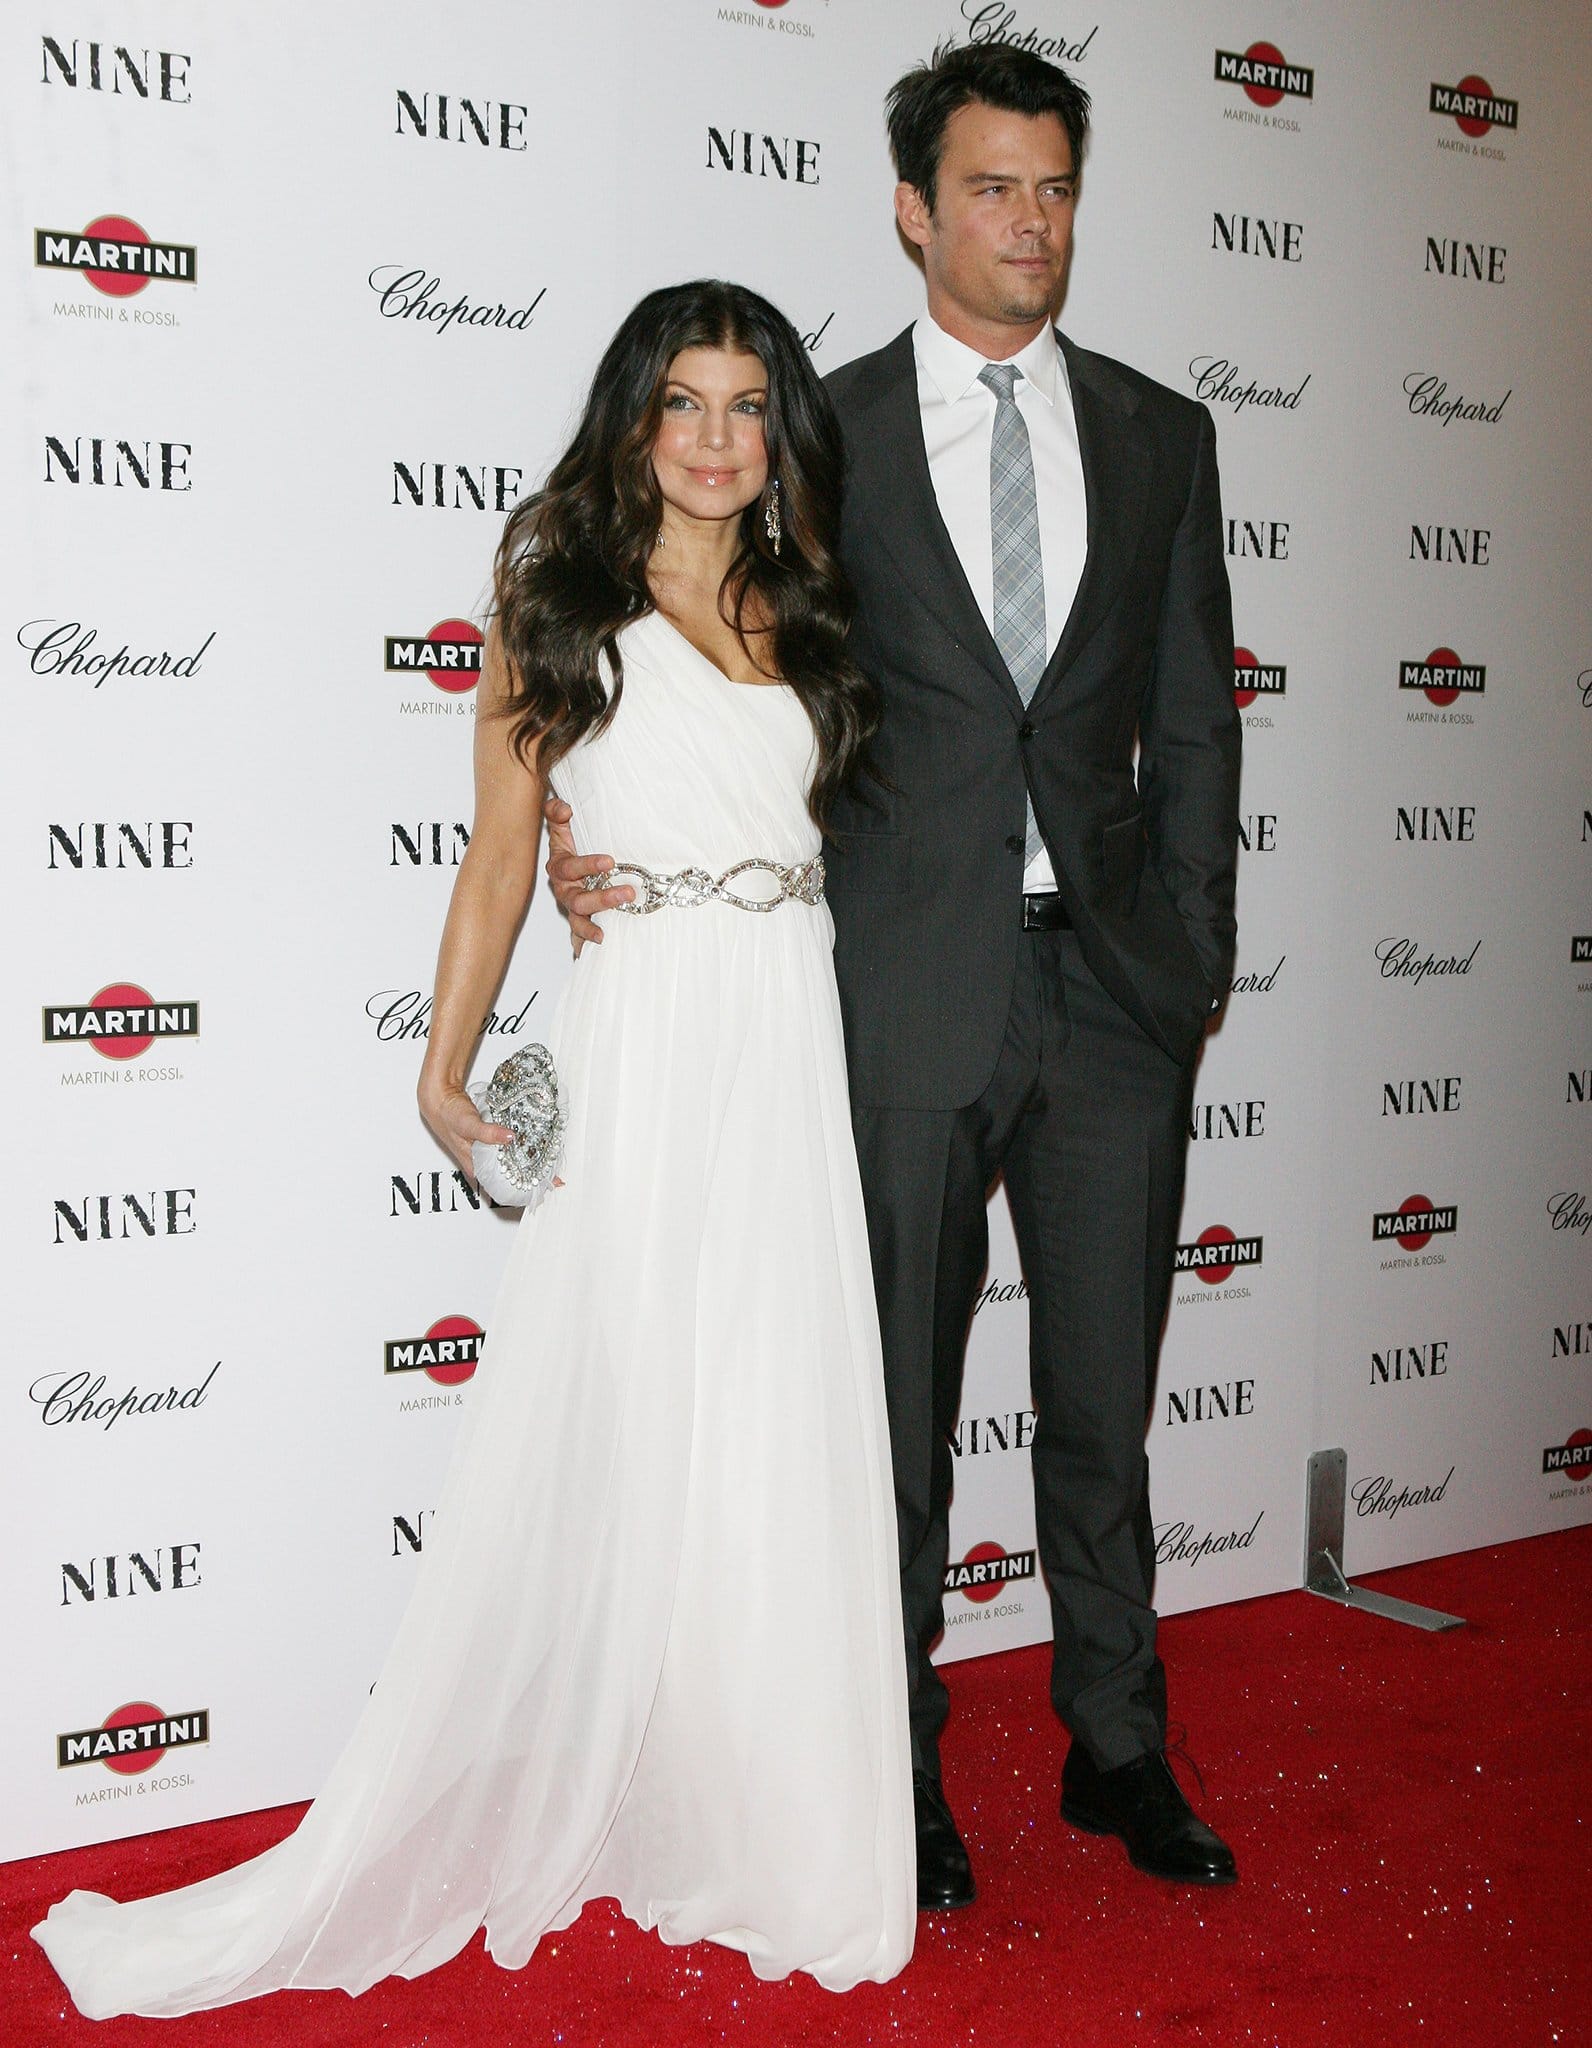 Fergie and Josh Duhamel tied the knot in front of their celebrity friends in Malibu in 2009